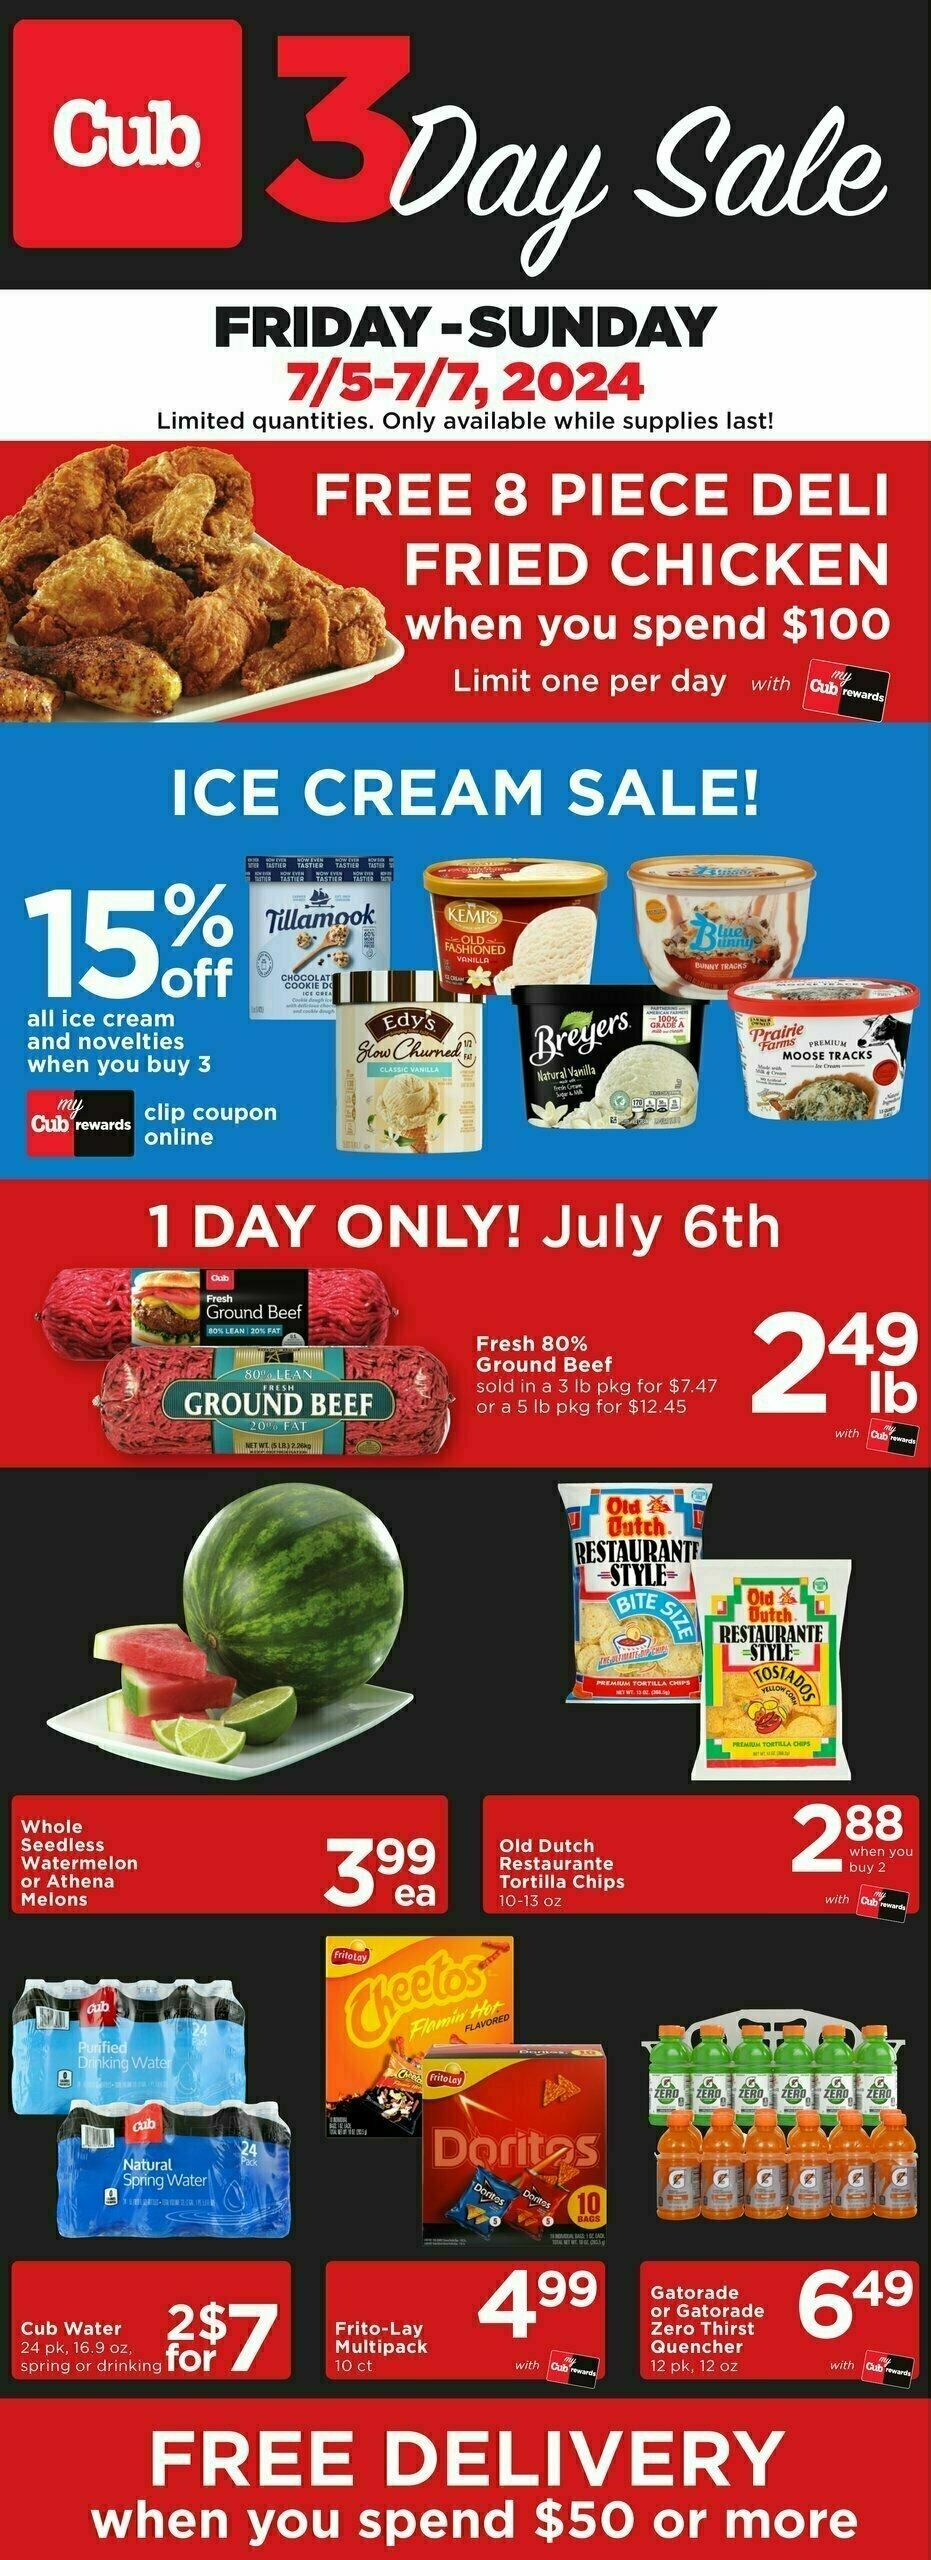 Cub Foods 3 Day Sale Weekly Ad from July 5